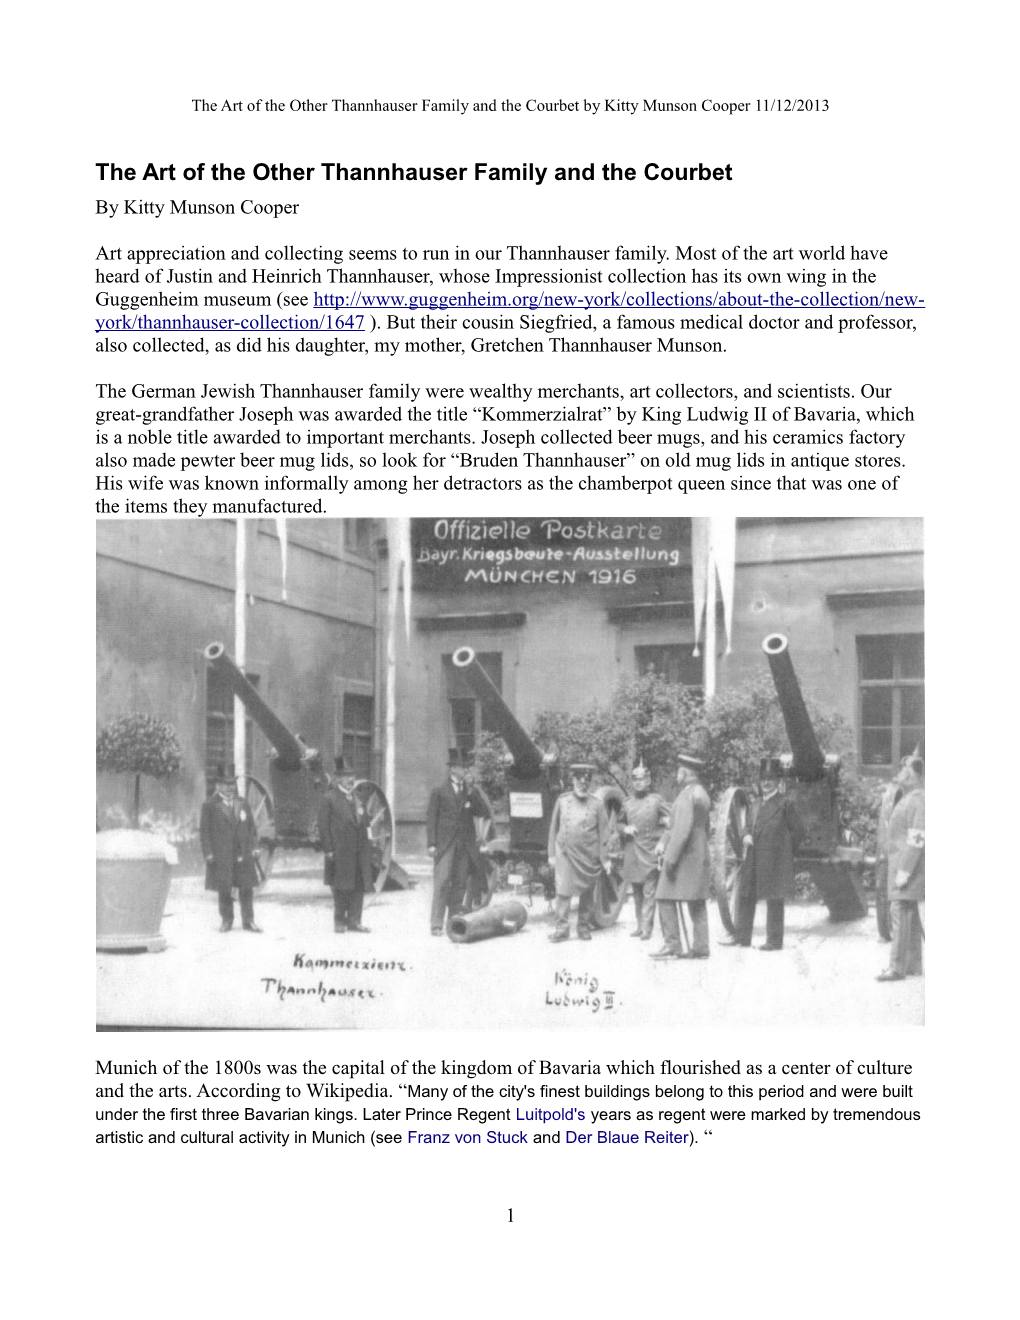 The Art of the Other Thannhauser Family and the Courbet by Kitty Munson Cooper 11/12/2013